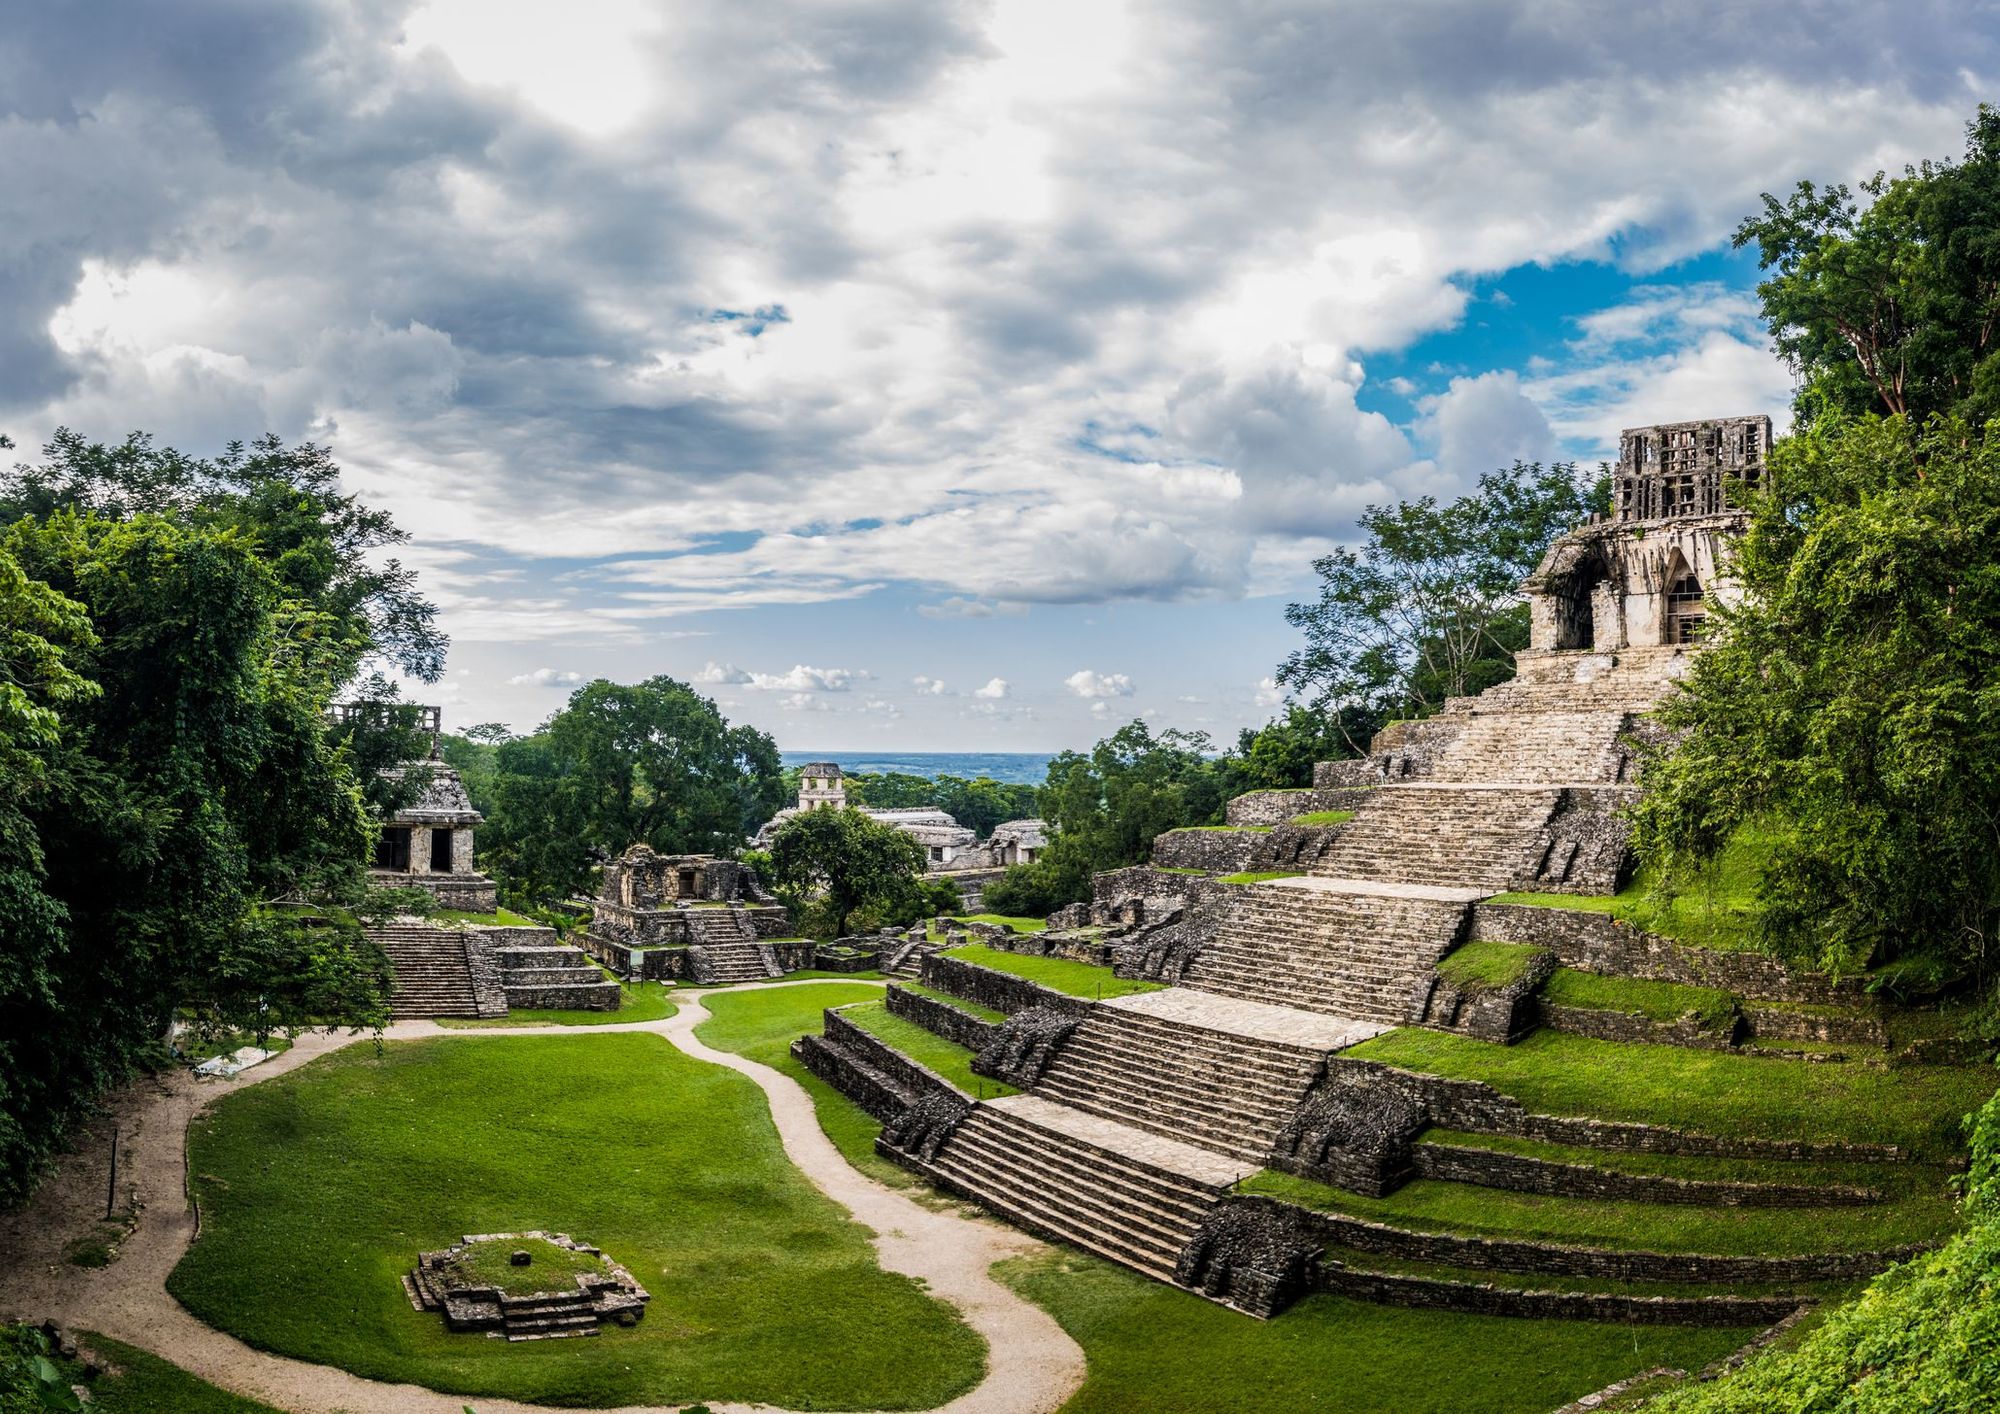 The Temples of the Cross at Palenque, the ancient Maya city in Mexico